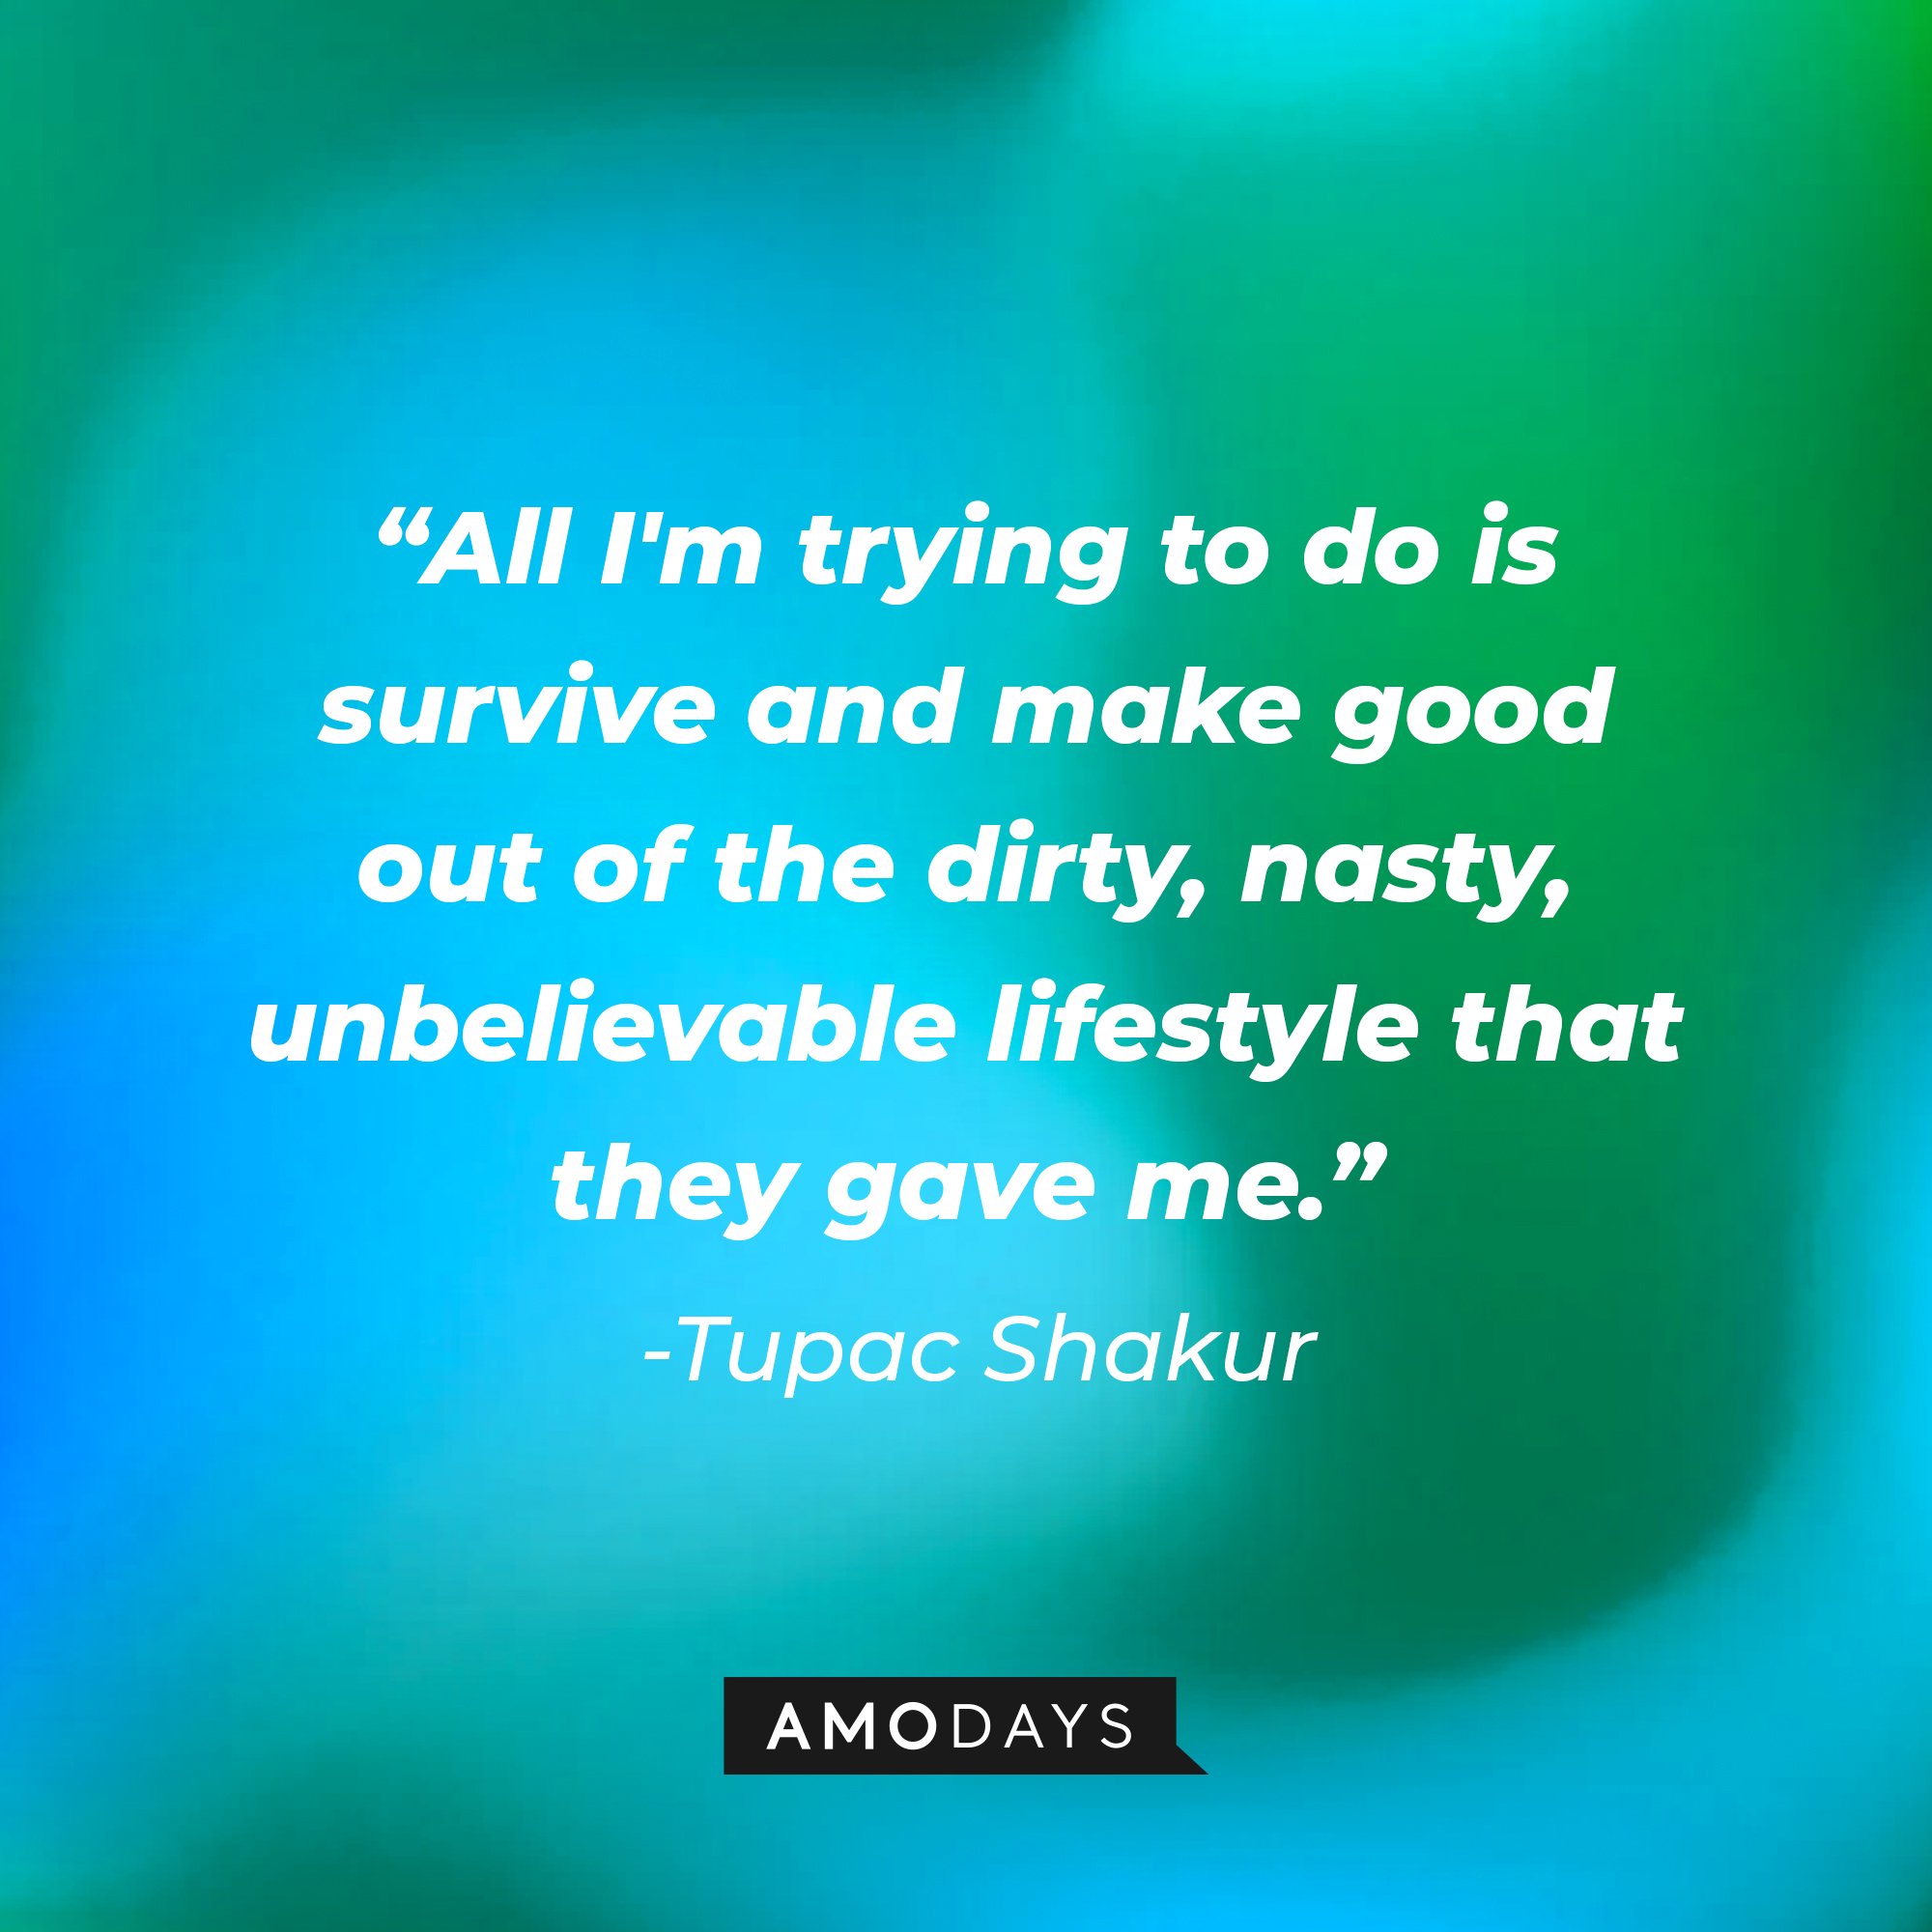 Tupac Shakur’s quote: "All I'm trying to do is survive and make good out of the dirty, nasty, unbelievable lifestyle that they gave me.” | Image: AmoDays 